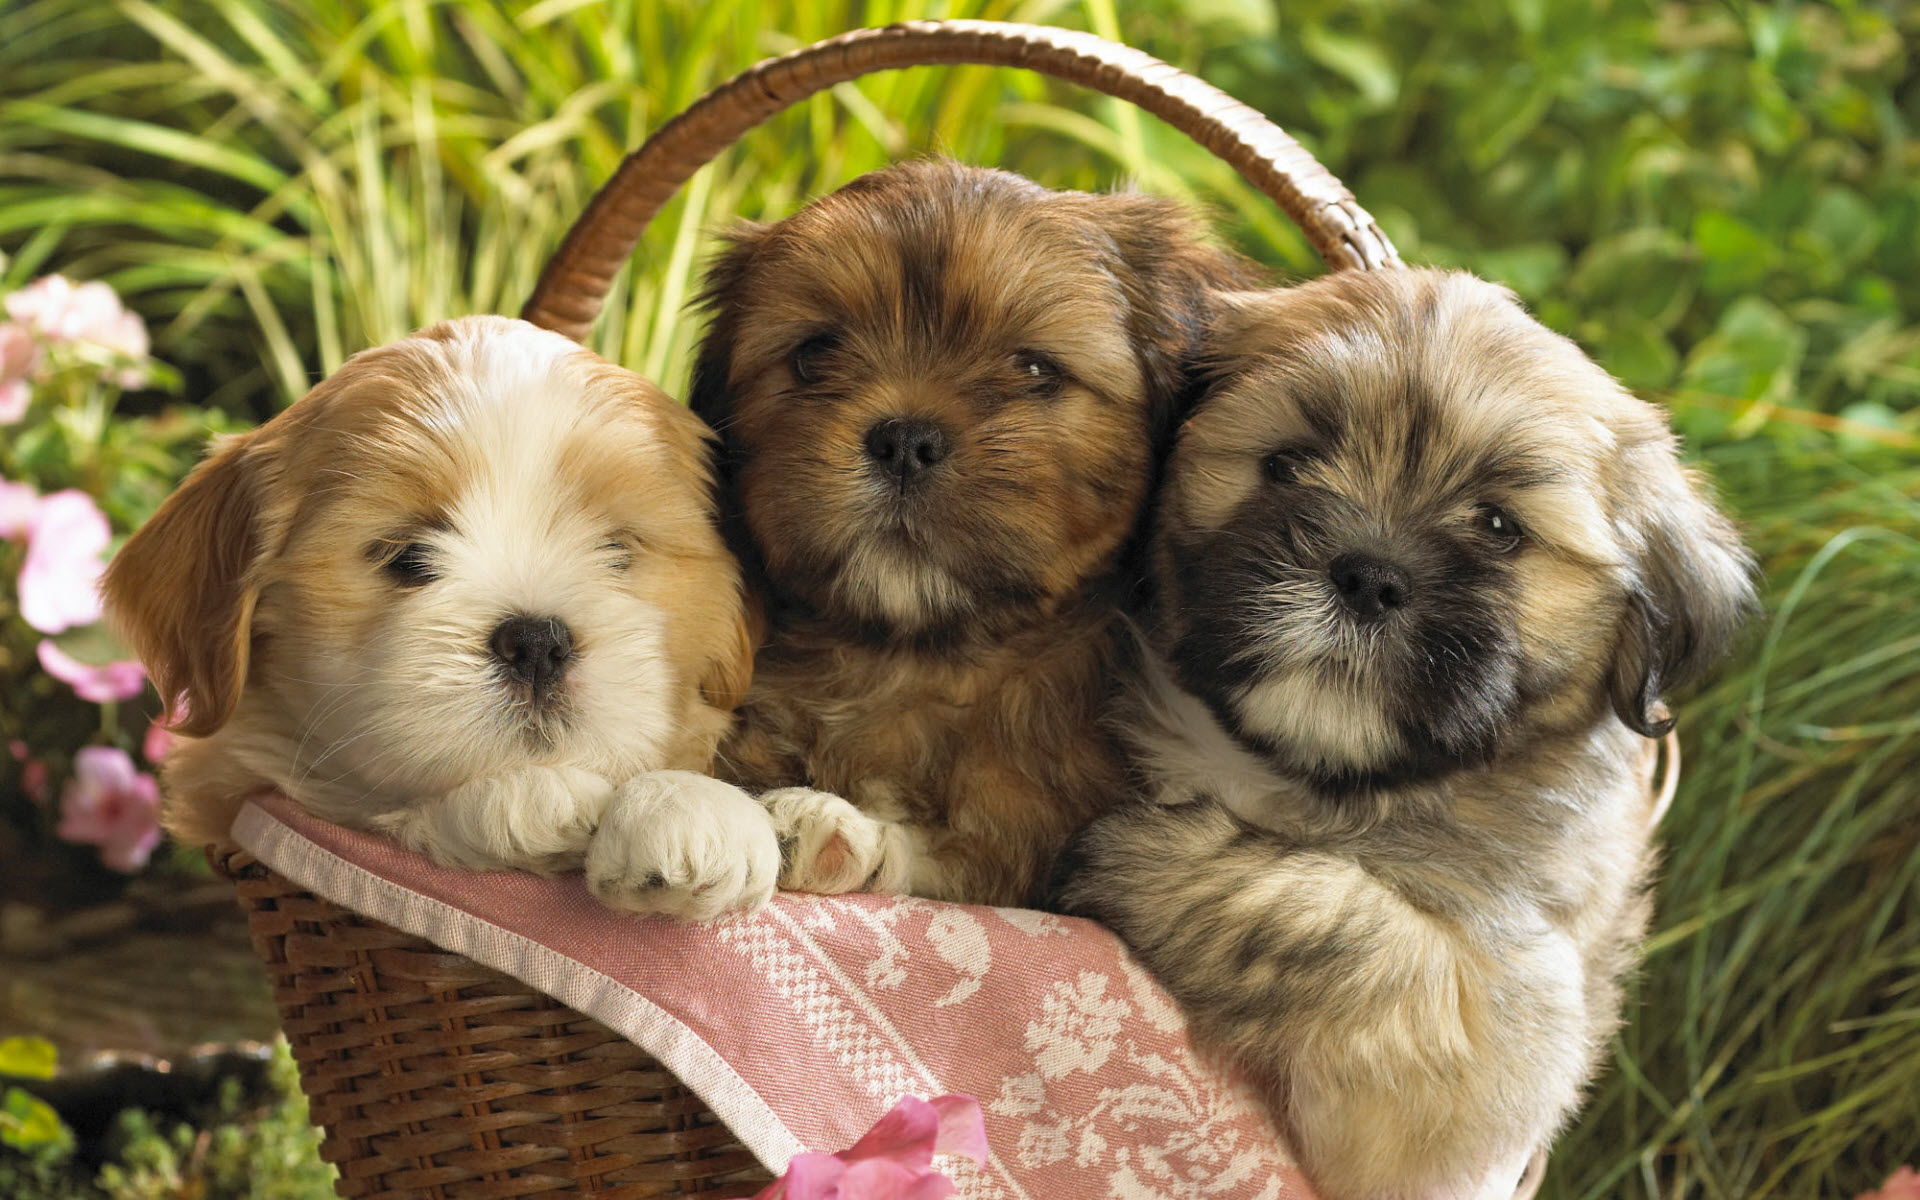 Cute Puppies 2 Wallpapers HD Wallpapers